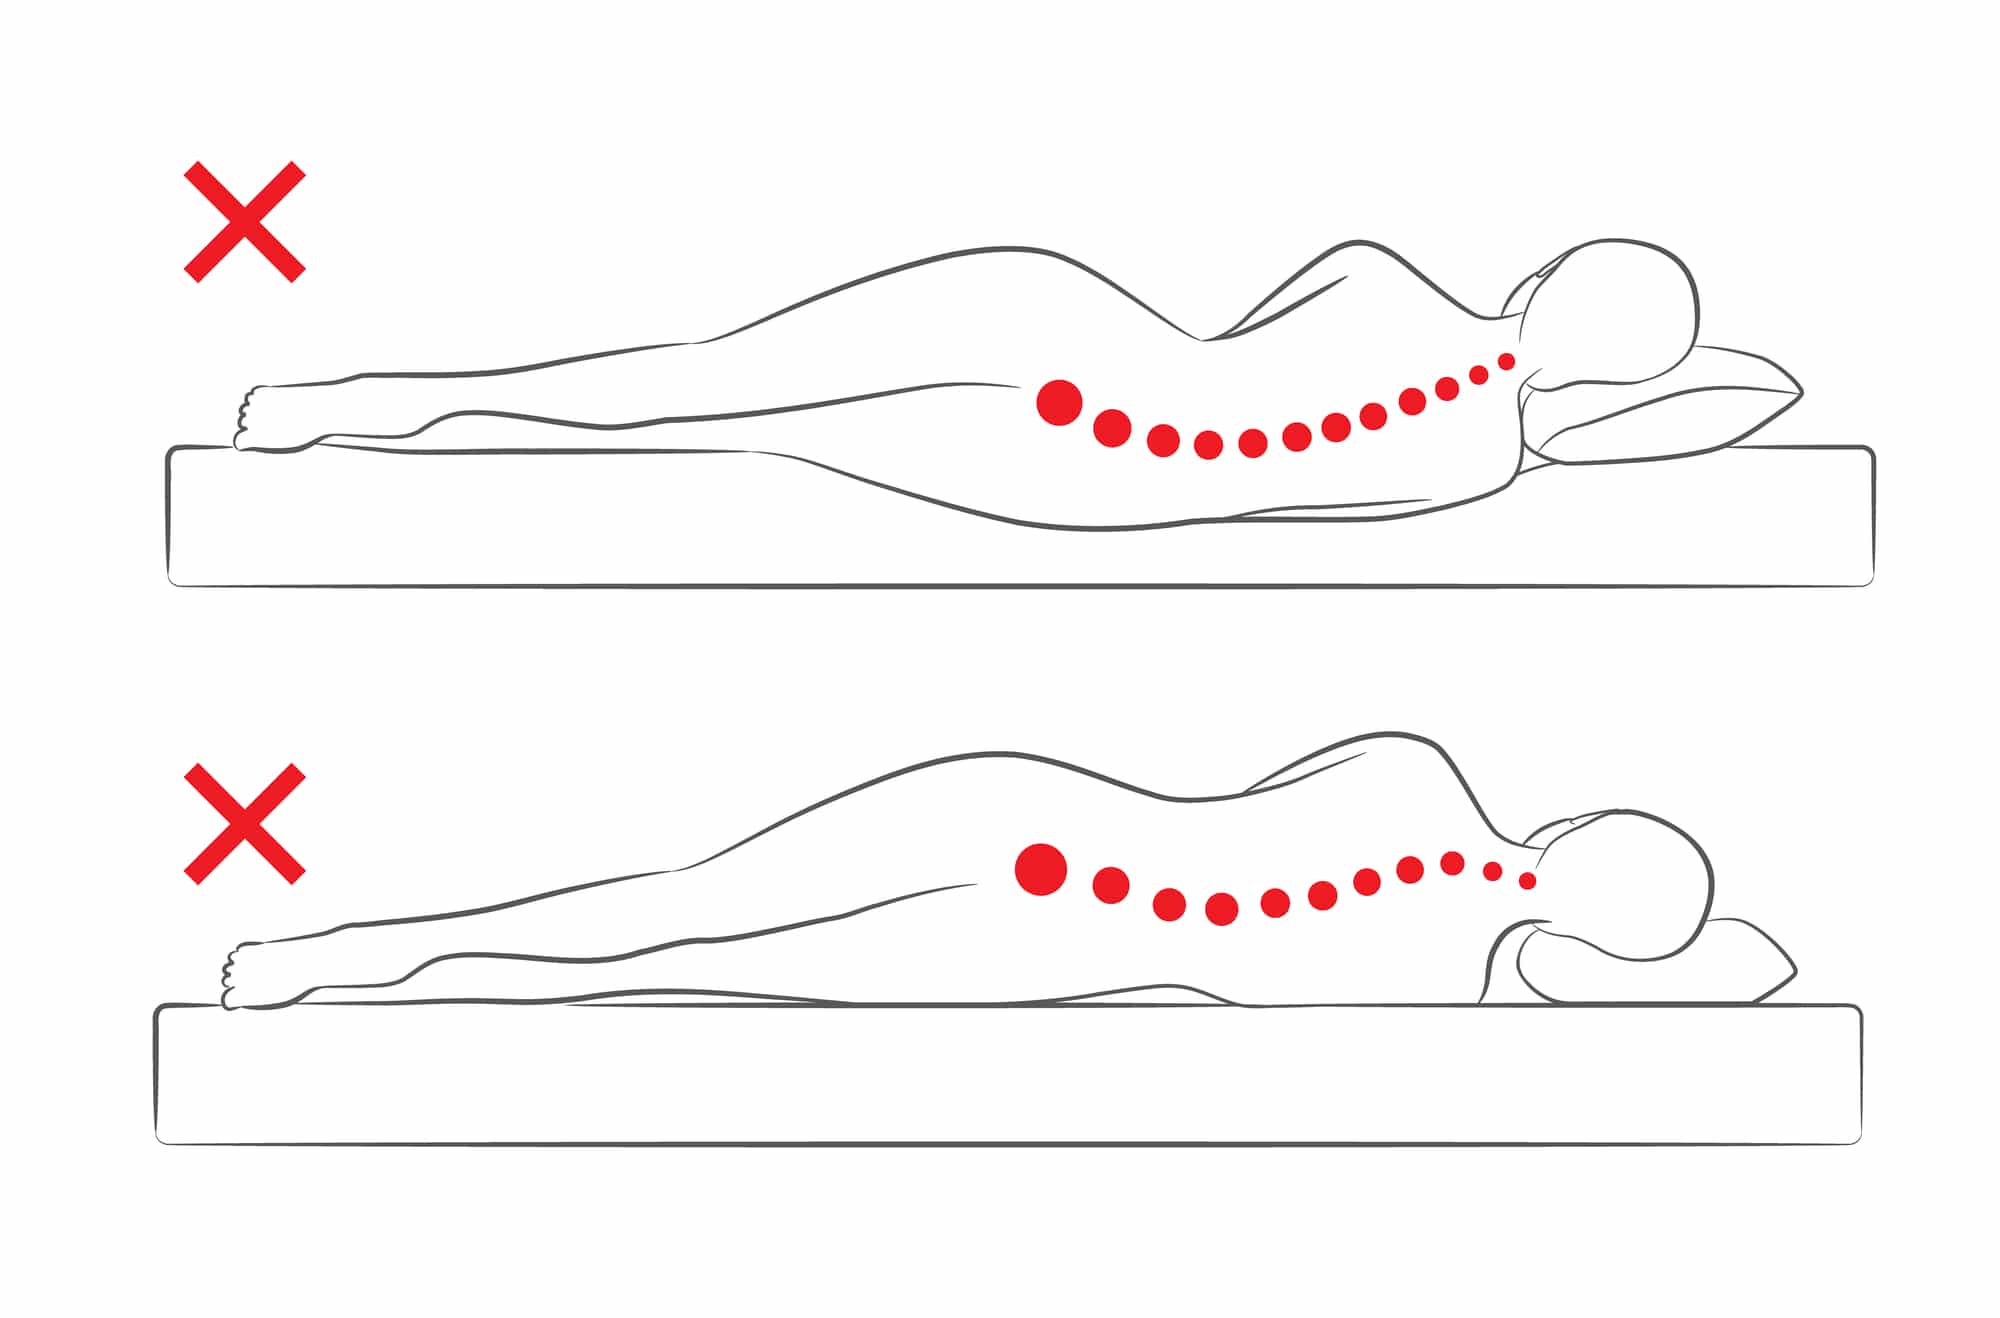 How To Align Your Spine In Bed For Back Pain Relief